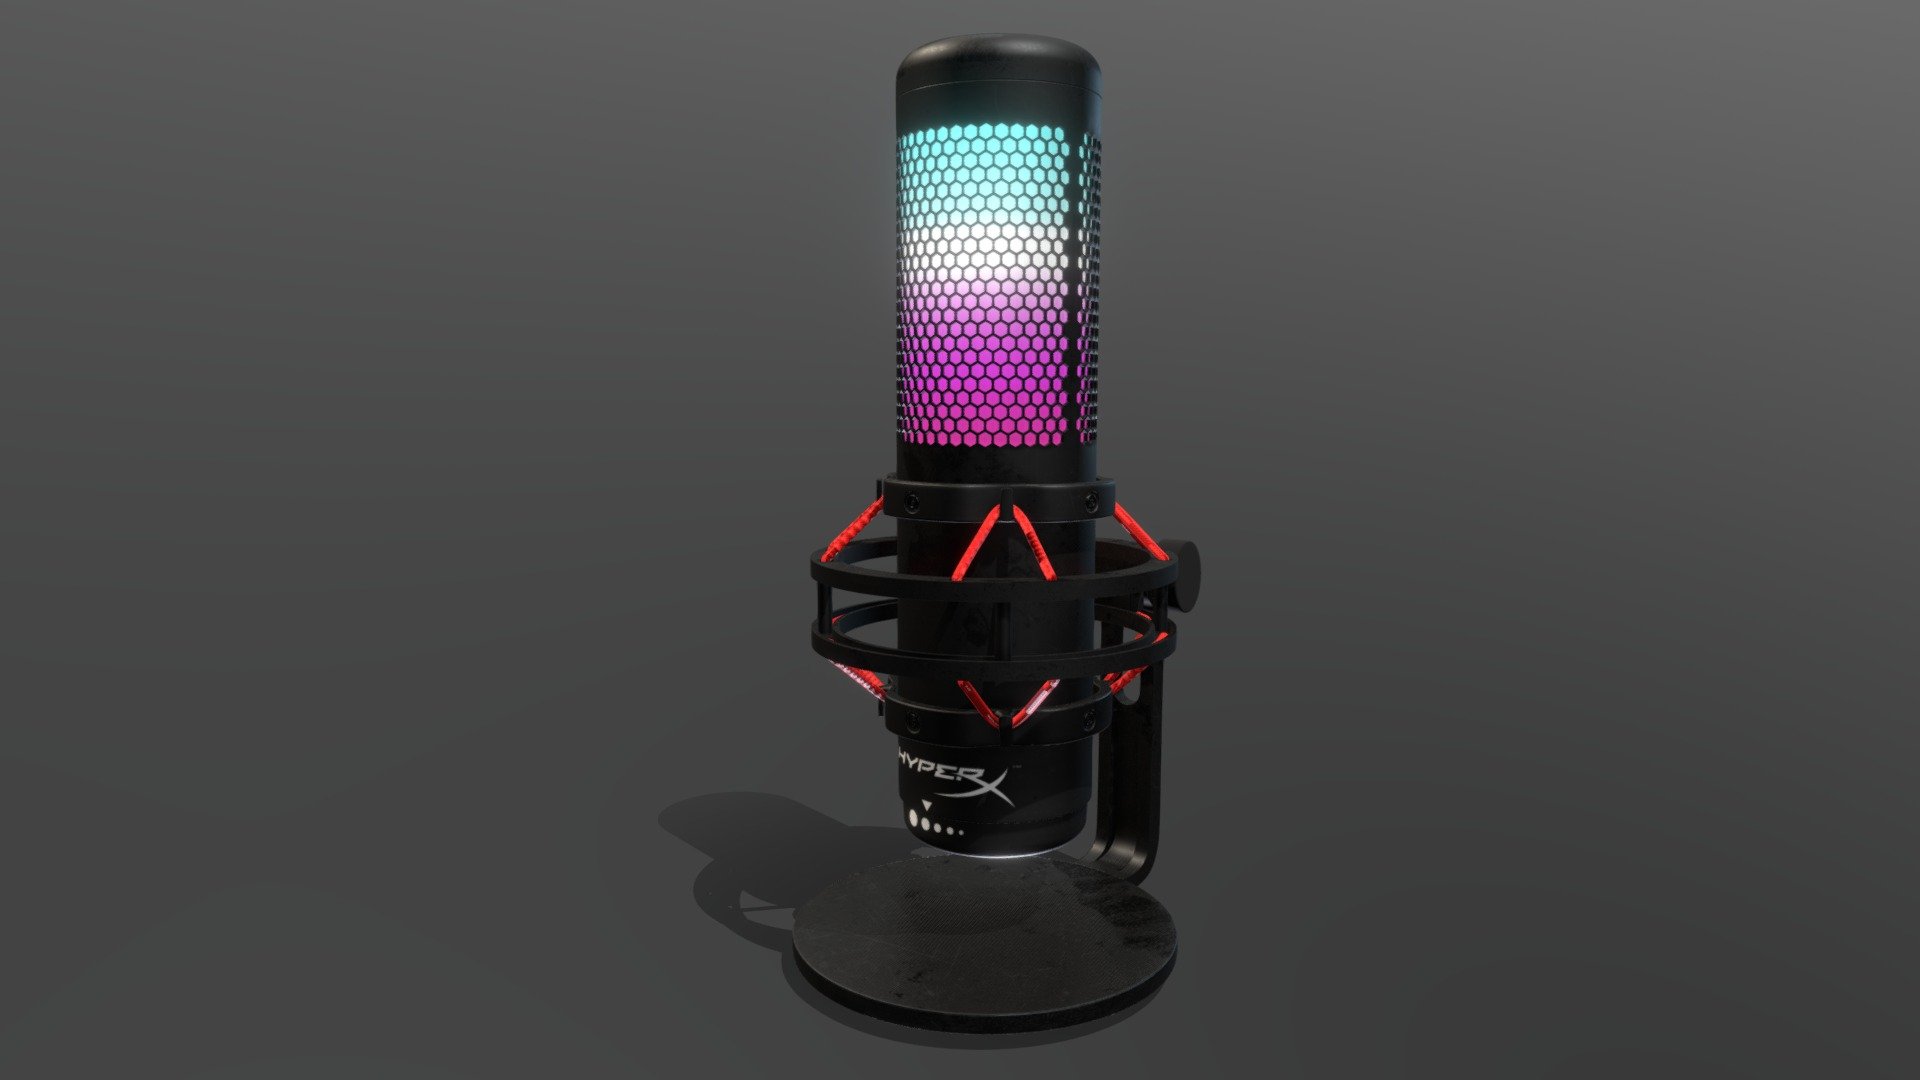 Realistic Quadcast Hyper X microphone on sale at Blendermarket.
Based on the real one, this is the high poly version with 4K textures. There is possible to see more pics and clos-ups in artstation.

https://www.artstation.com/artwork/ZGyyQ1 - Quadcast Microphone Hyper X - 3D model by Danvill 3d model